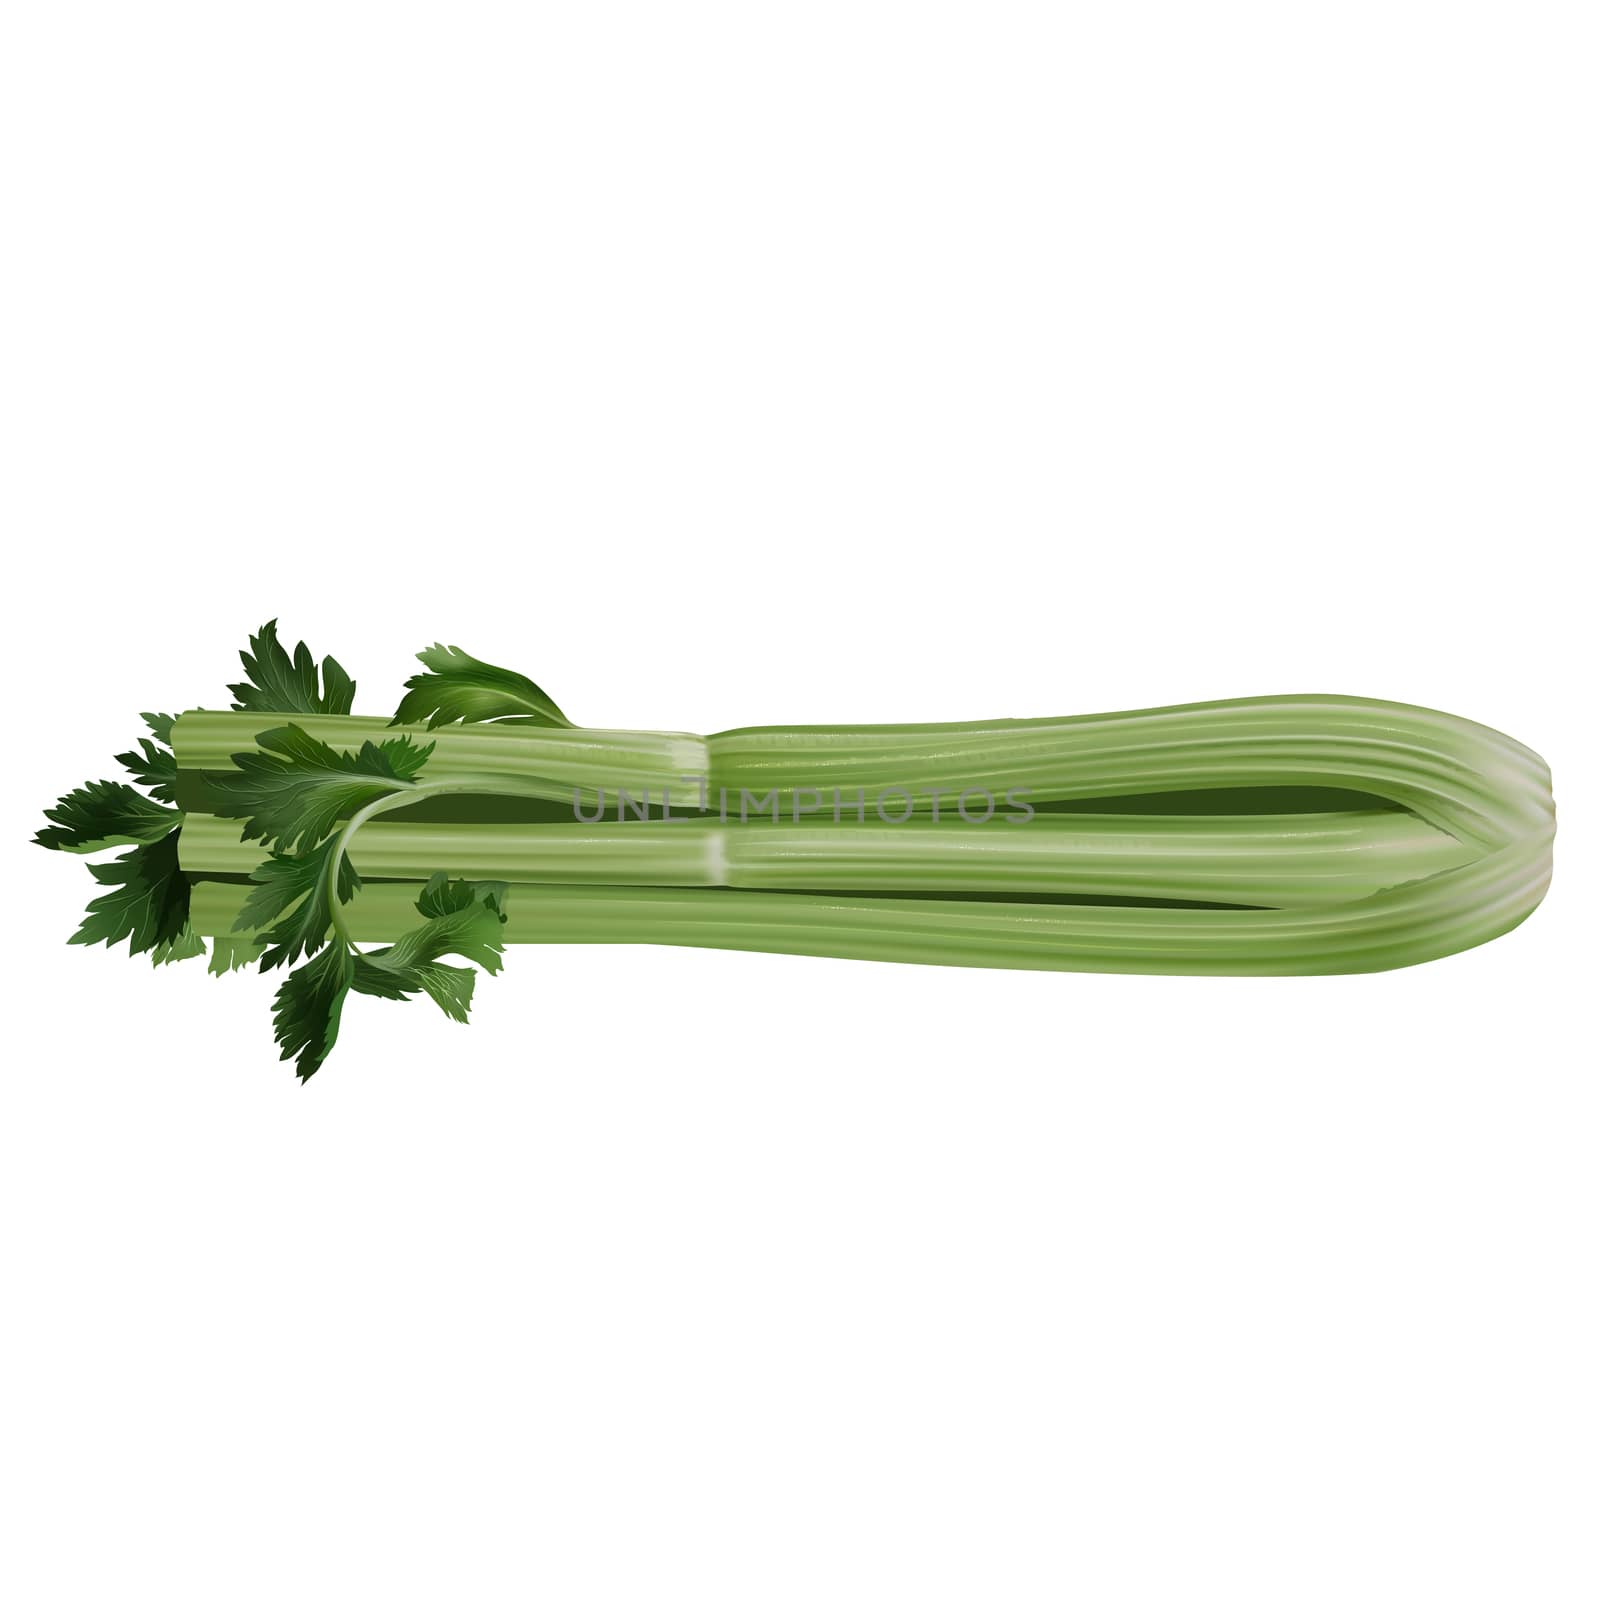 Celery on white background by ConceptCafe